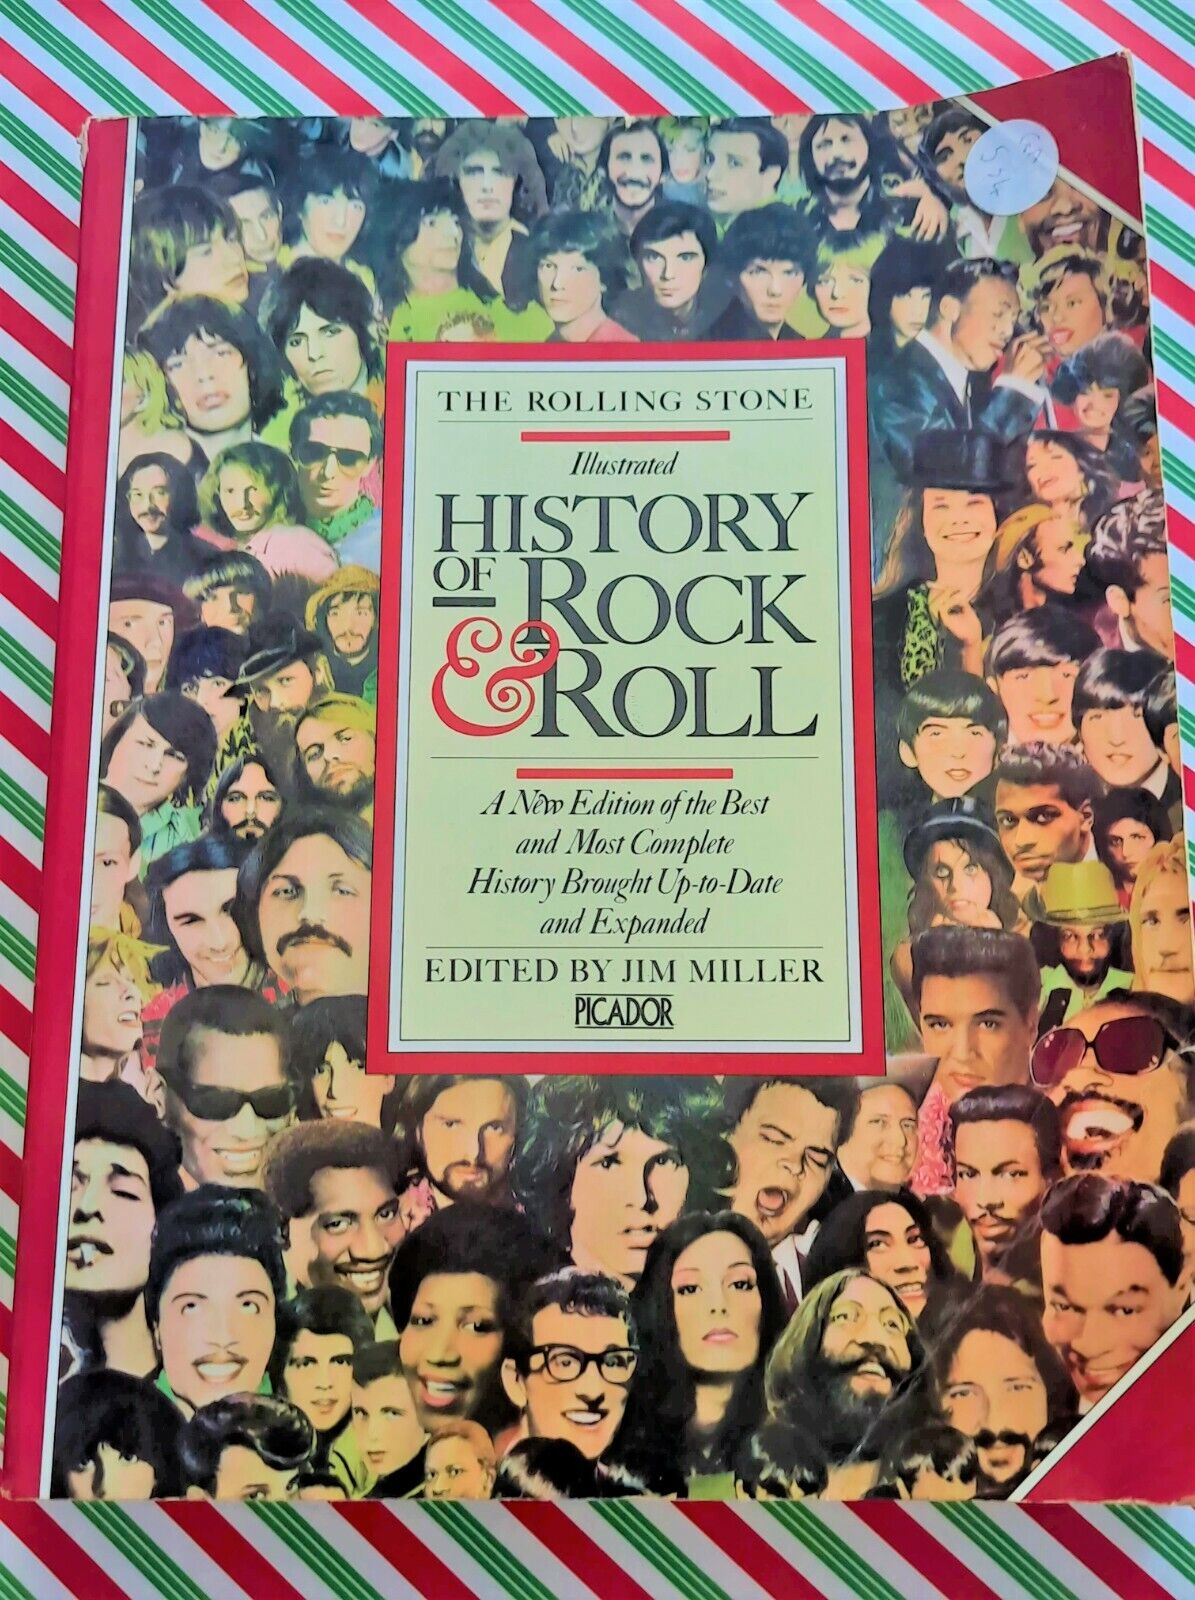 The Rolling Stone Illustrated History of Rock and Roll by Jim Miller (1980)